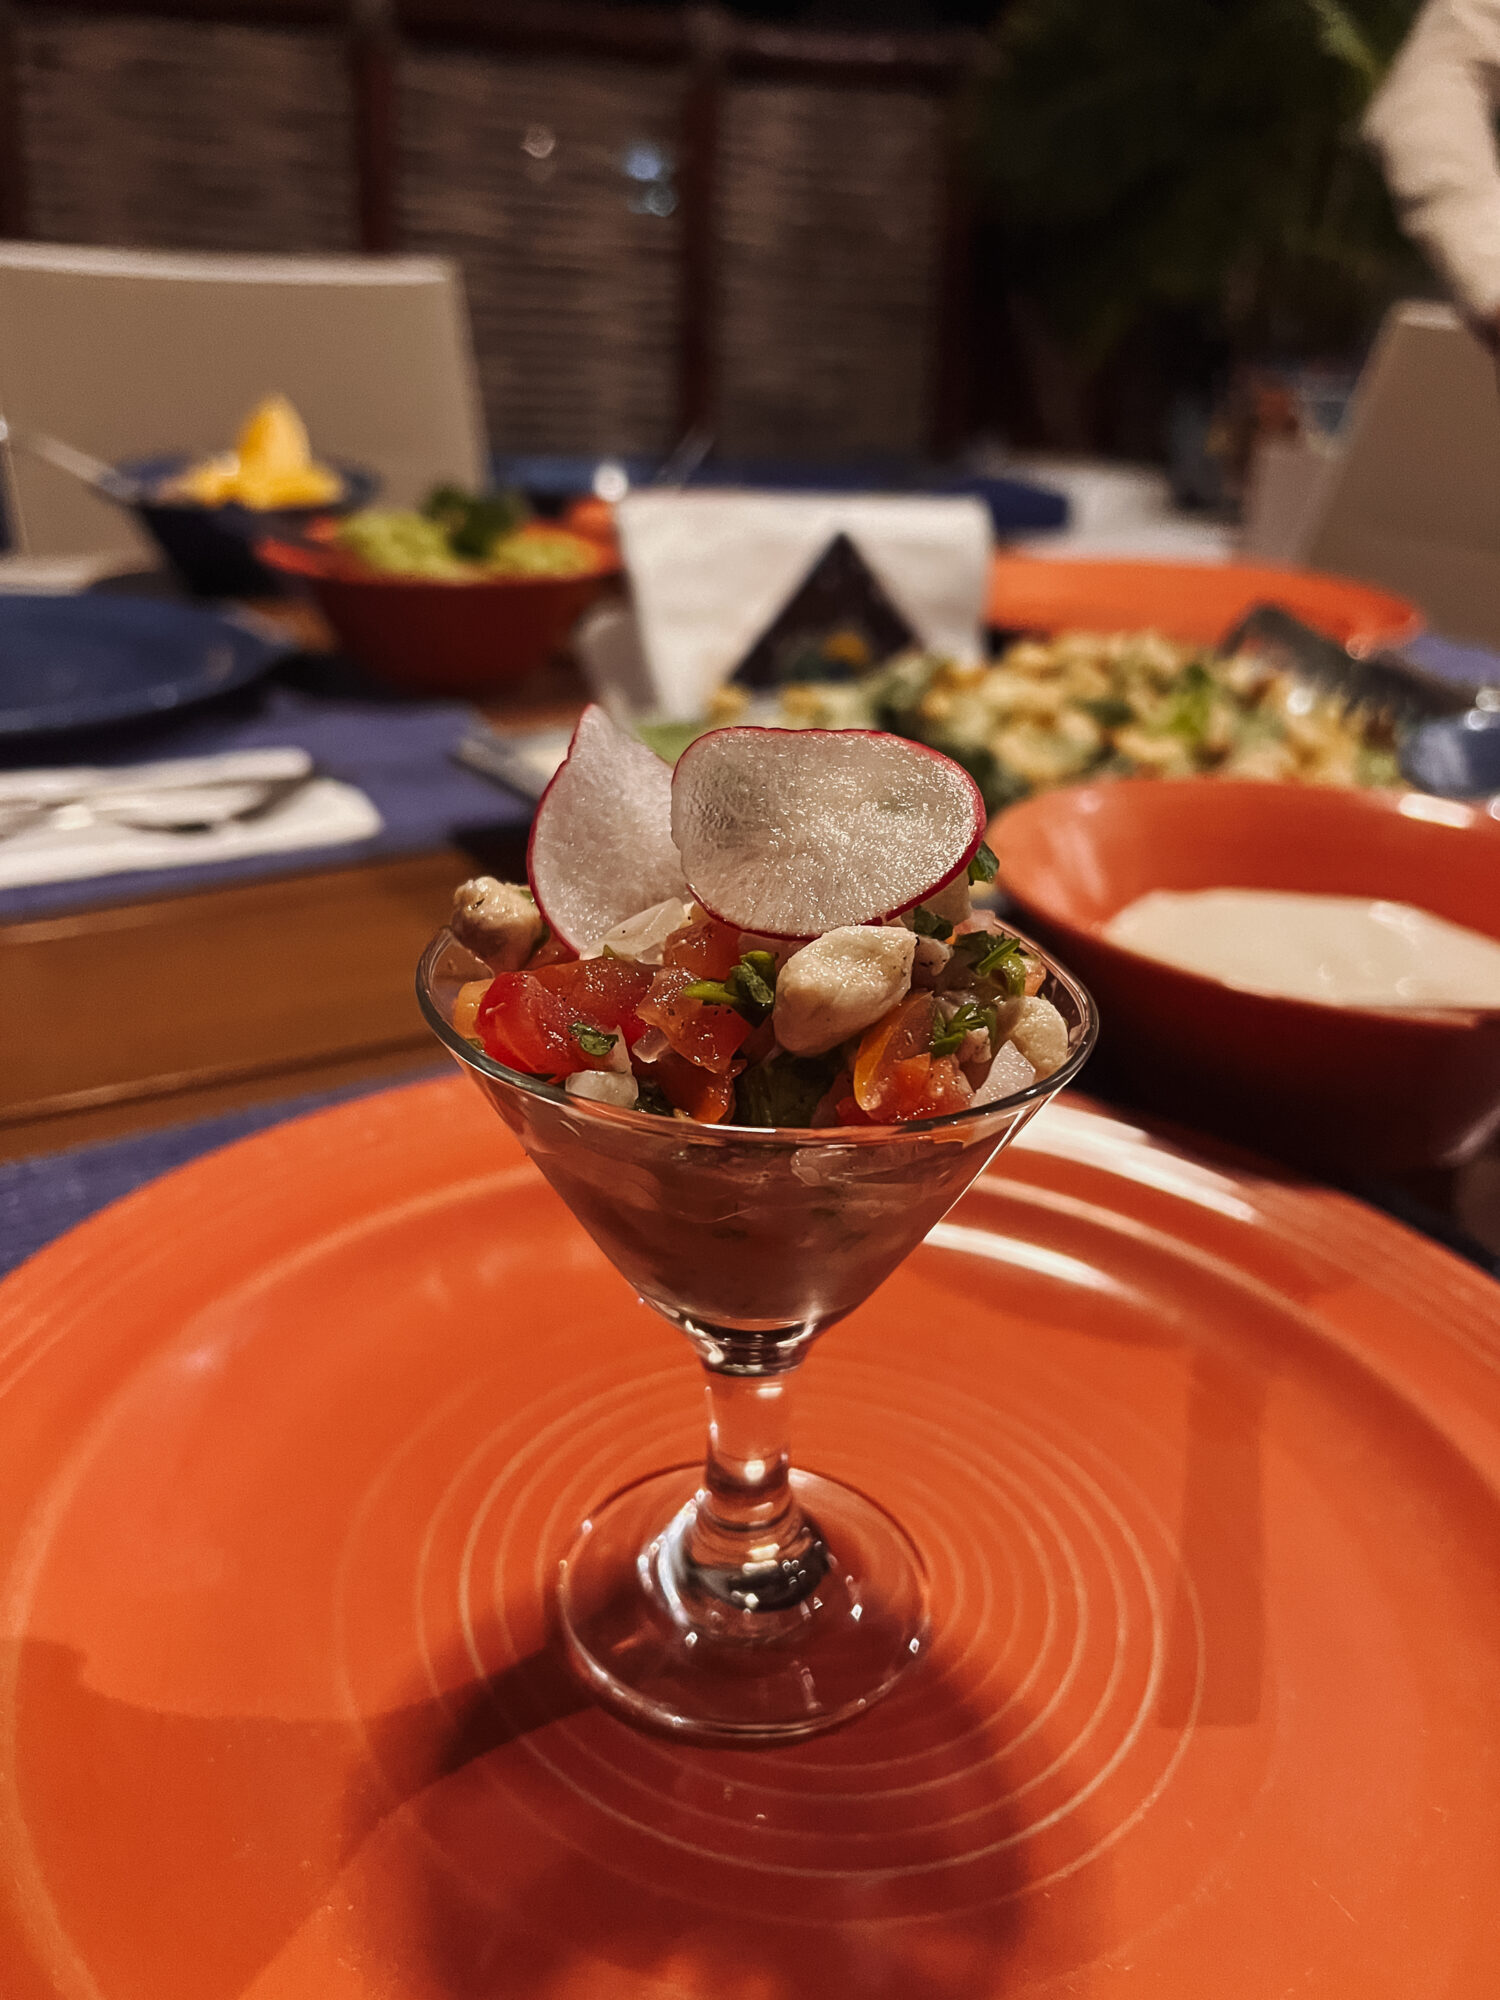 our personal chef literally catered to anything we needed, including a last minute ceviche order